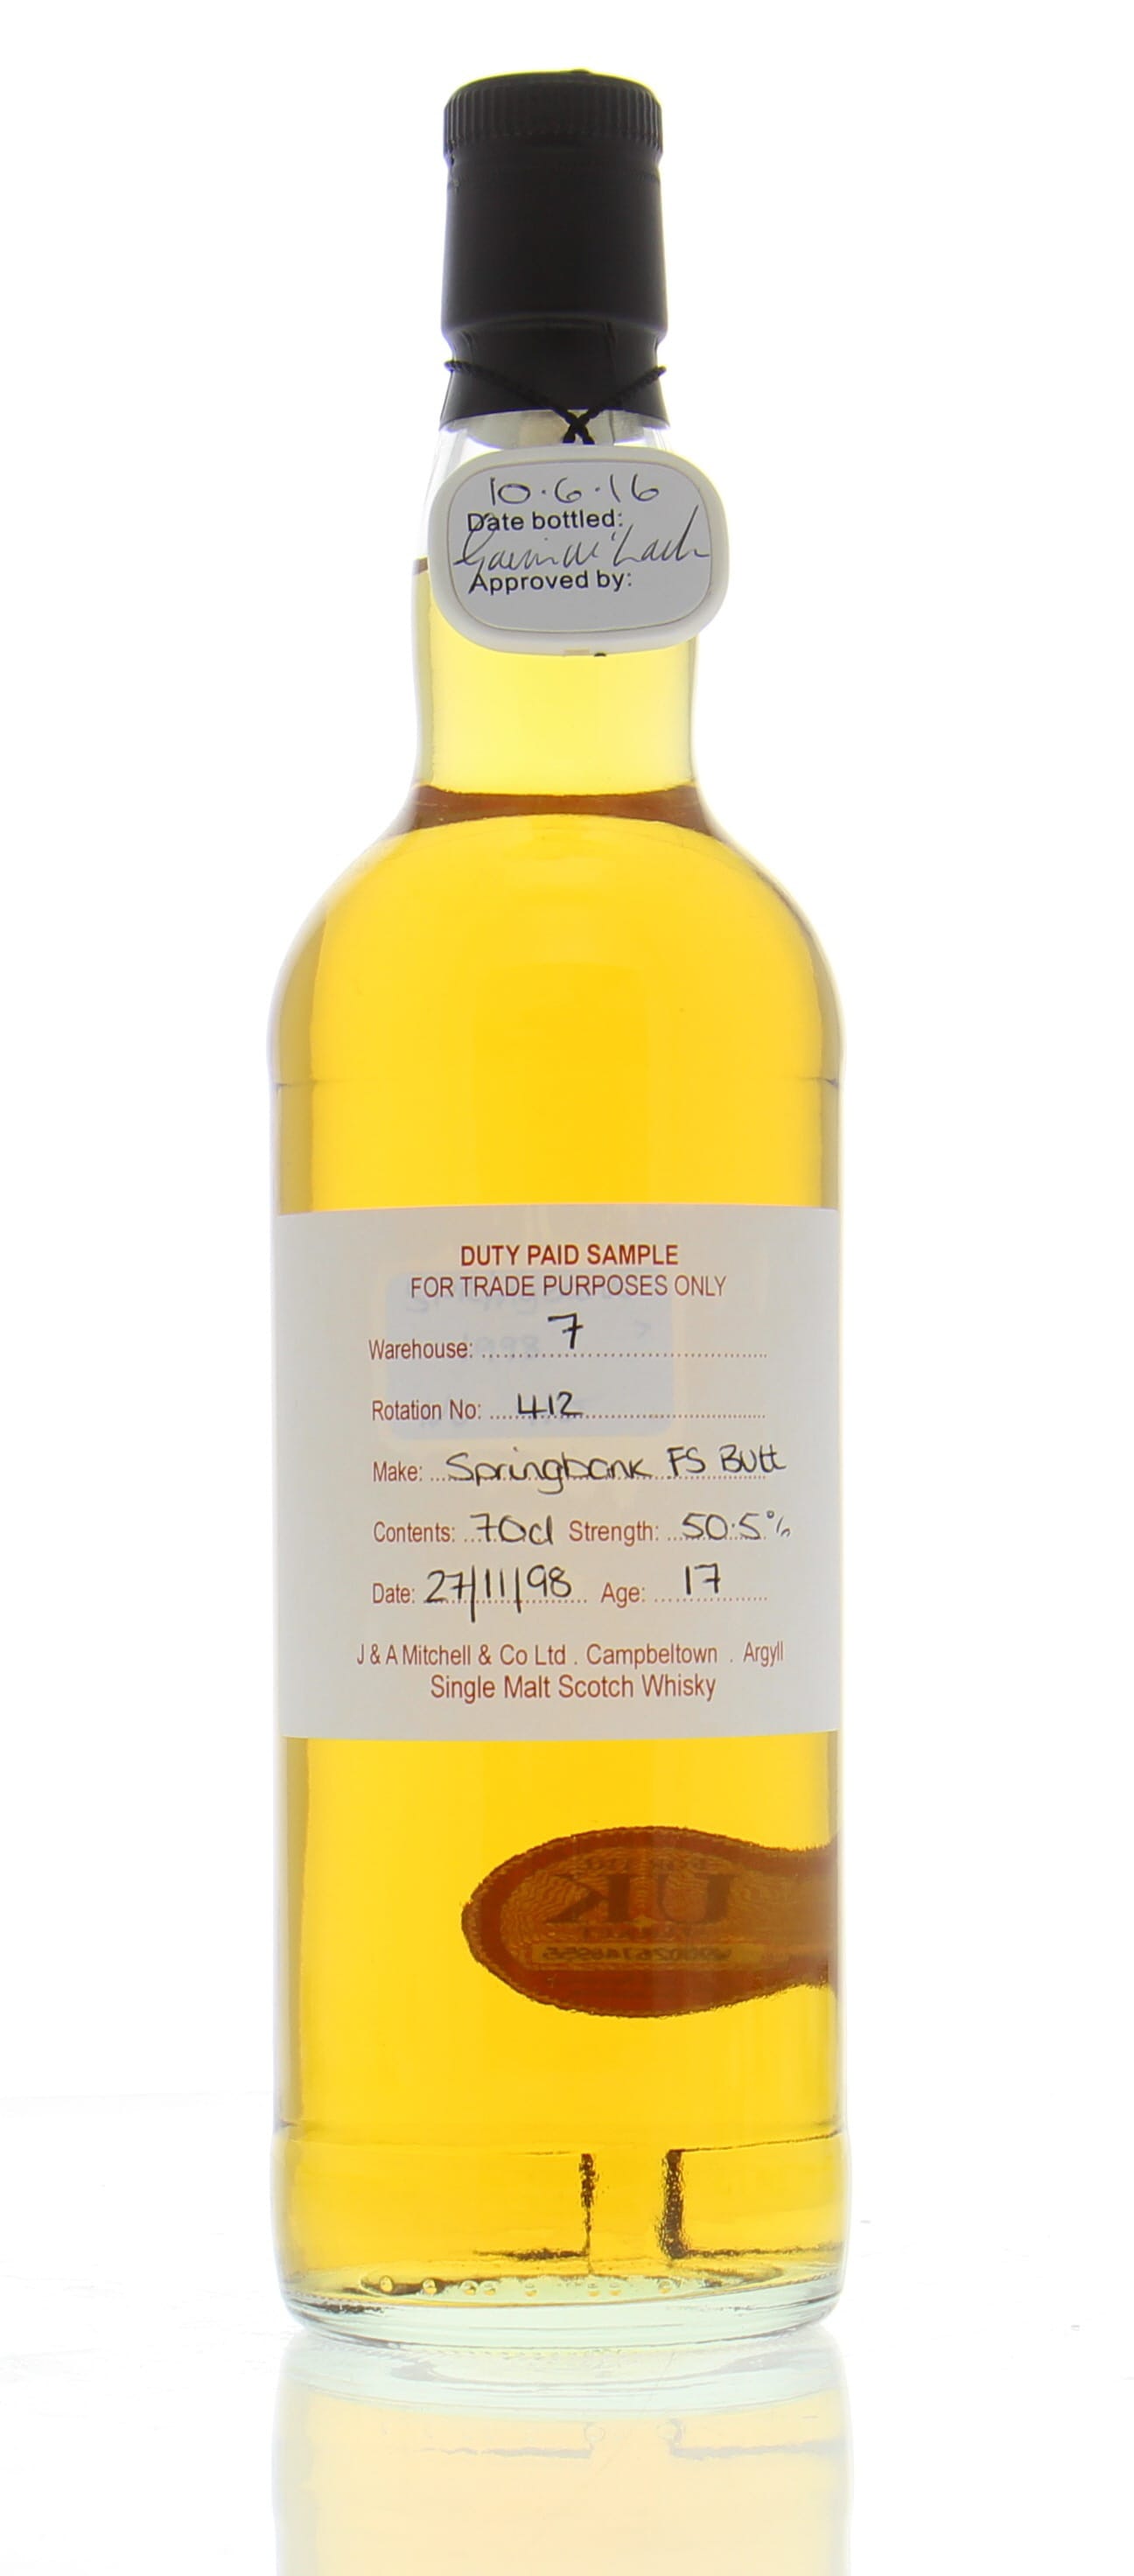 Springbank - 17 Years Old Duty Paid Sample Warehouse 7 Rotation 412 50.5% 1998 Perfect